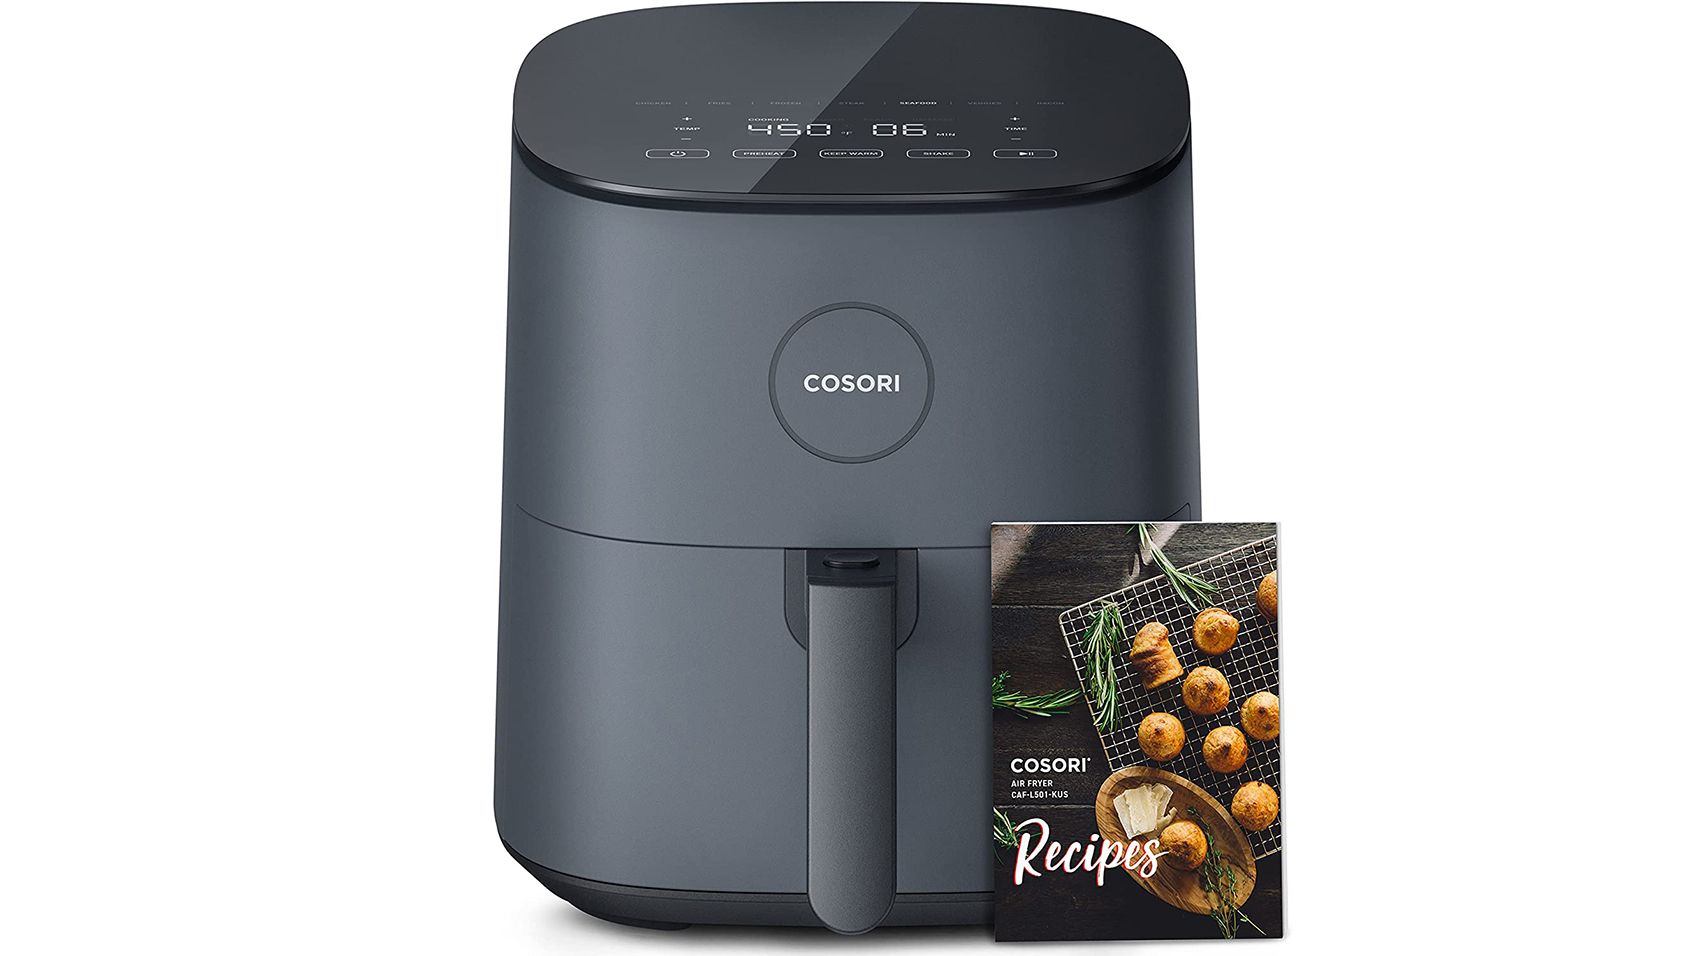 Prime Day 2021: The best air fryer deals from Ninja, Cosori and more